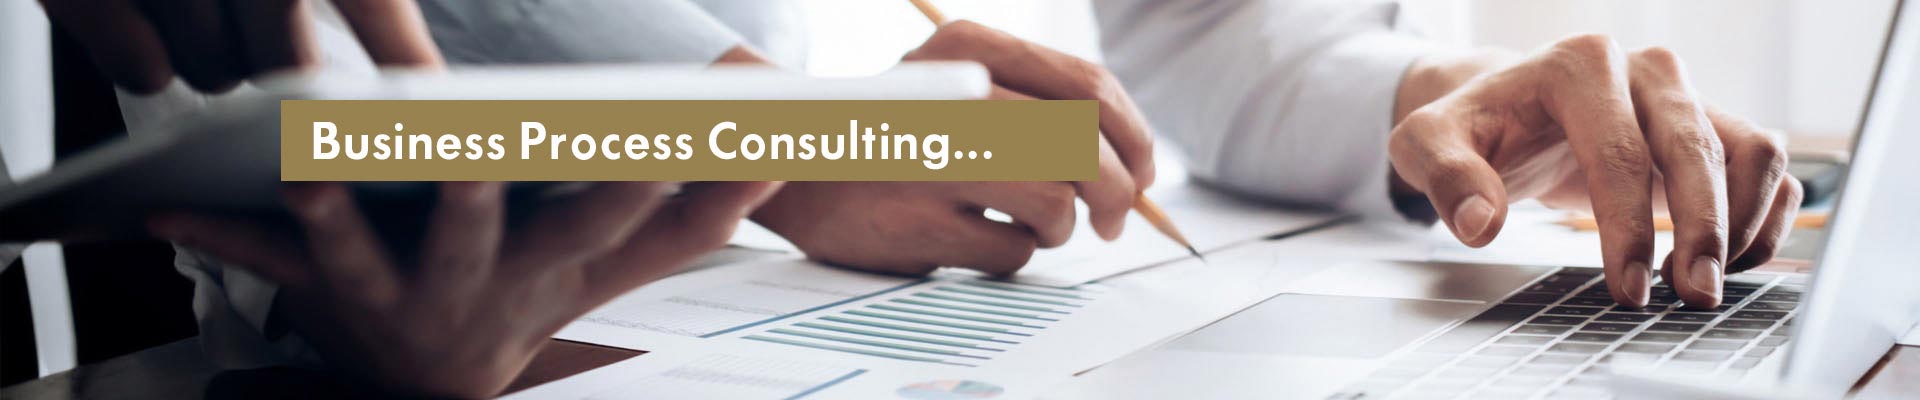 RCMS Revenue Cycle Business Process Consulting